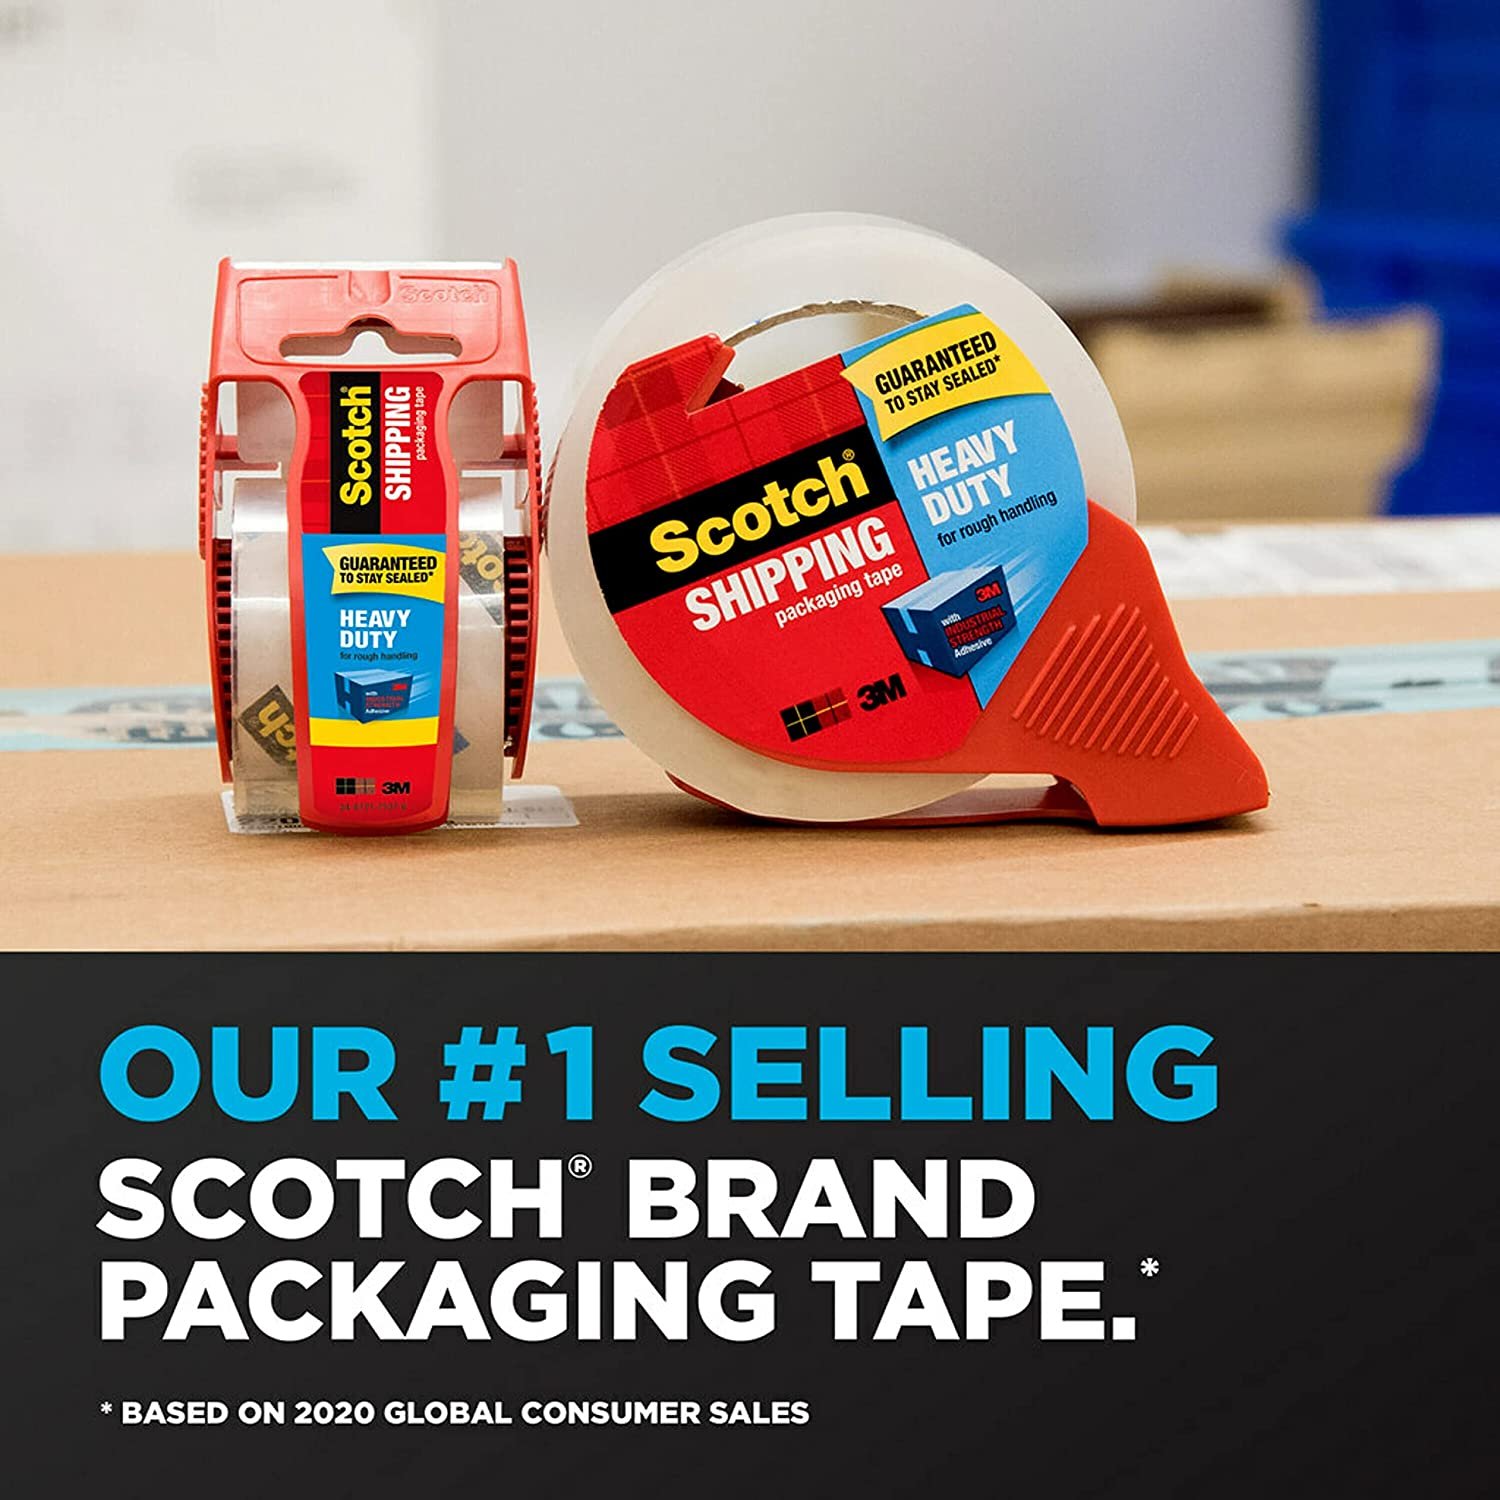 Scotch Heavy Duty Packaging Tape by the Scotch Store, 2 Pack